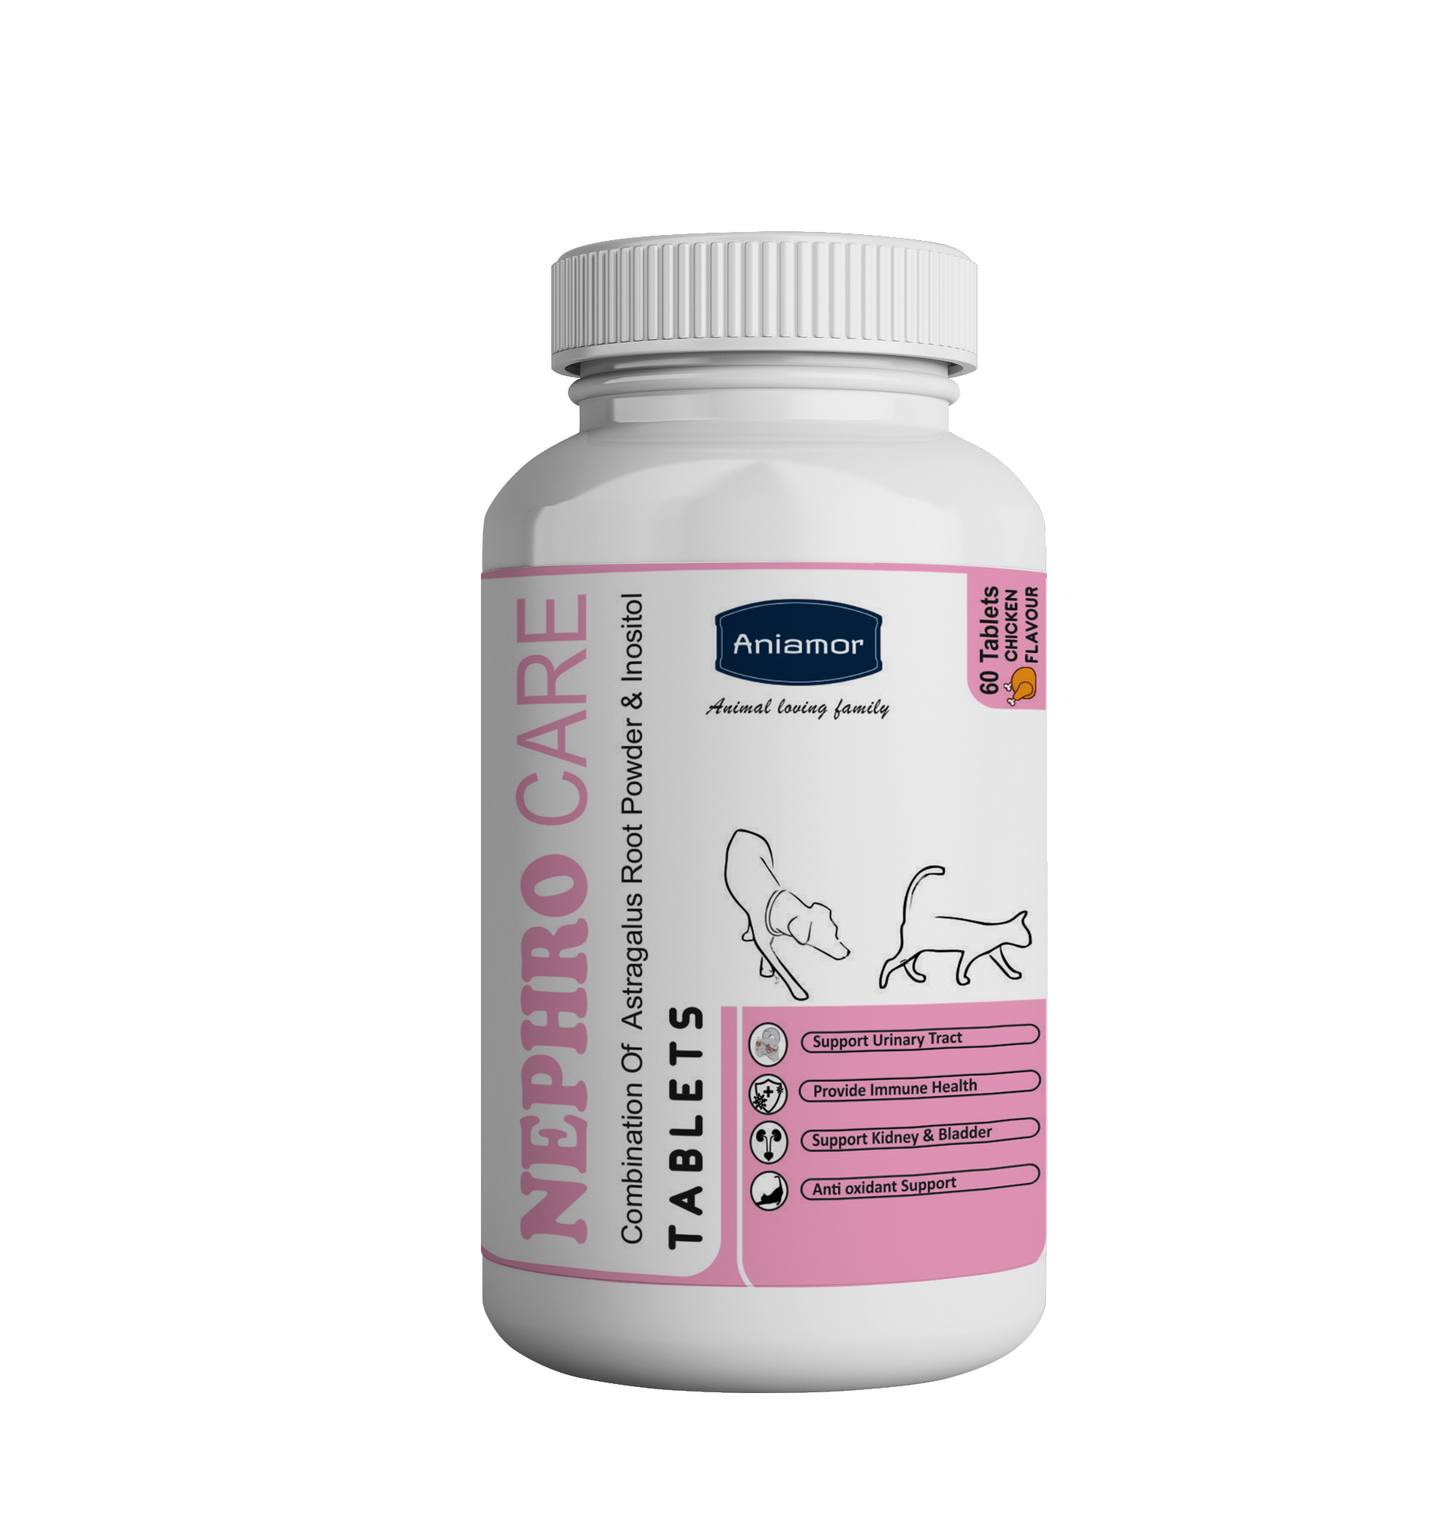 Nephro care tablets-Aniamor| Lecithin Tablets| 60 Tablets